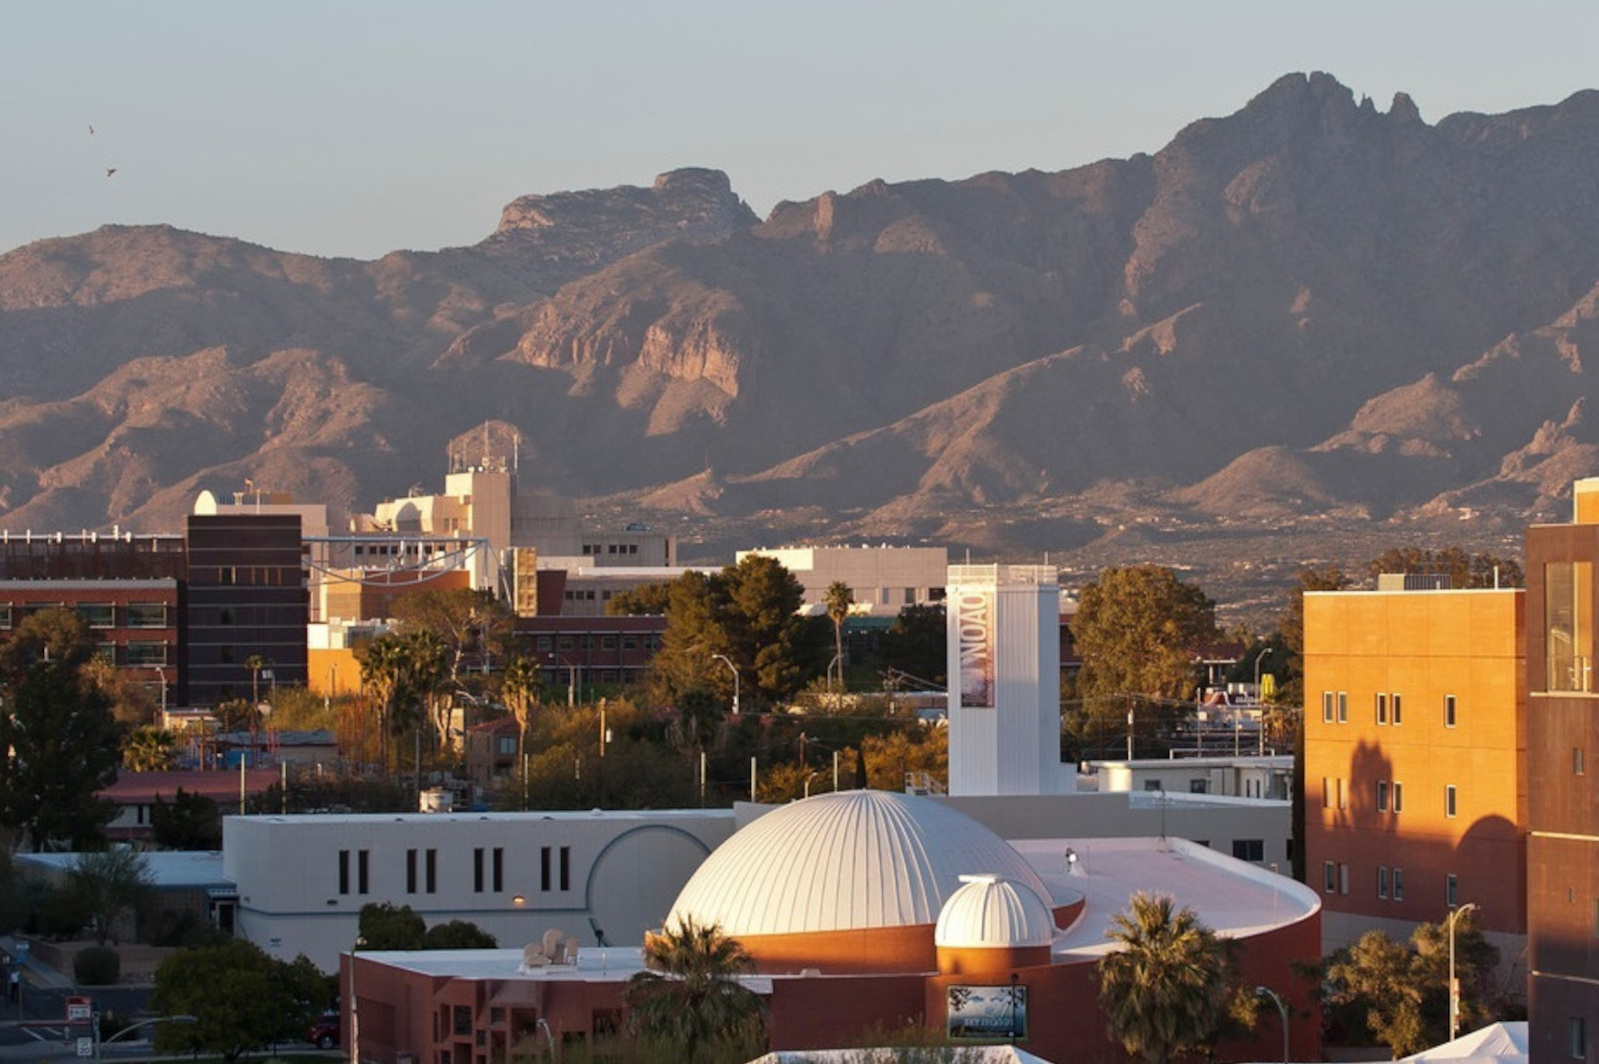 Campus buildings with Santa Catalina mountains in the background